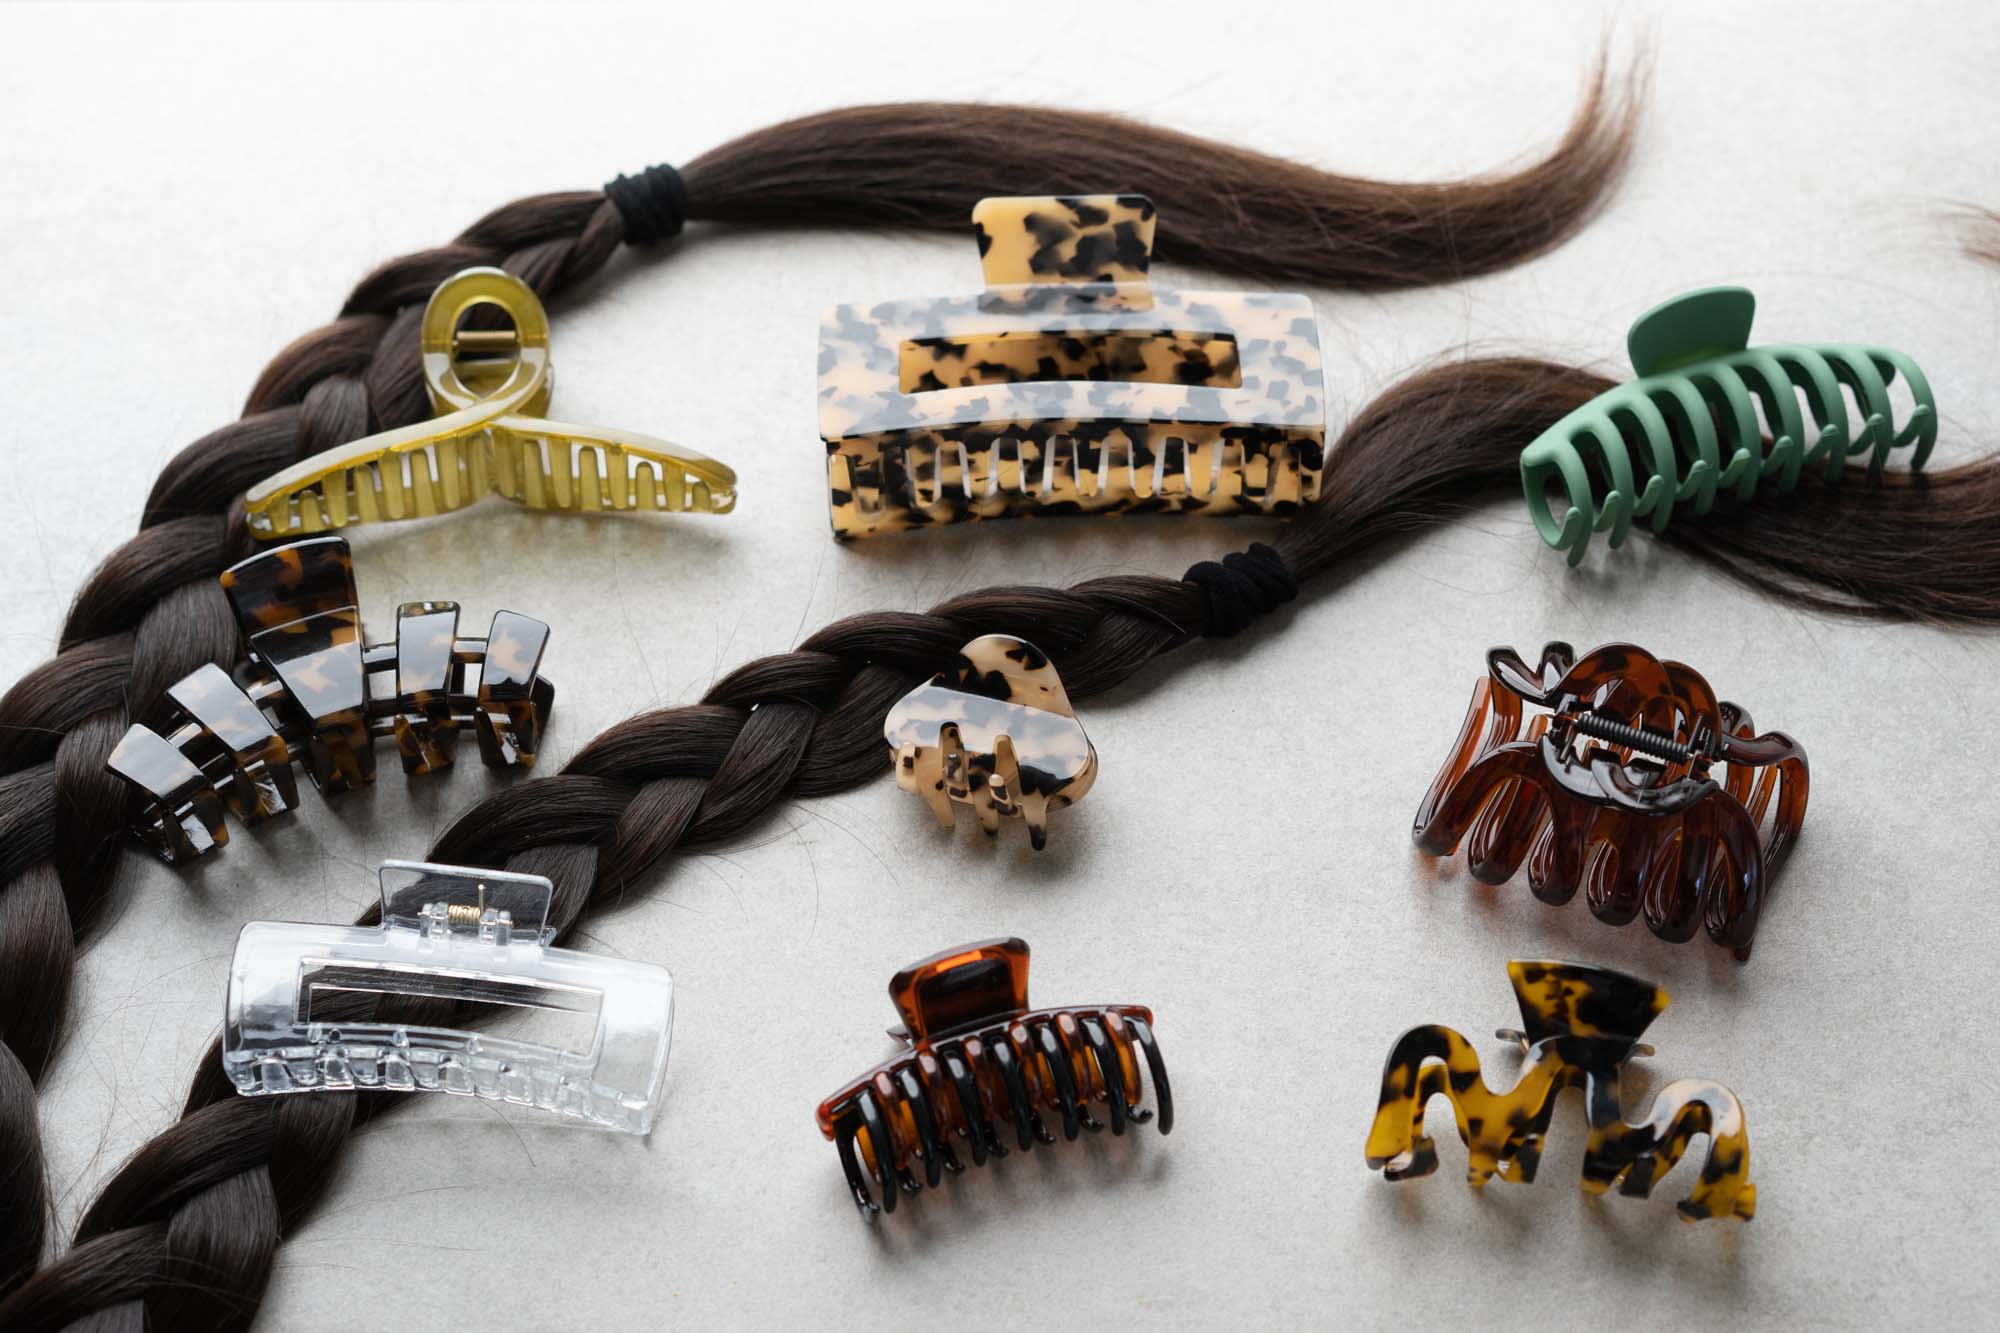 The Best Hair Clips: The Unavoidable Accessory